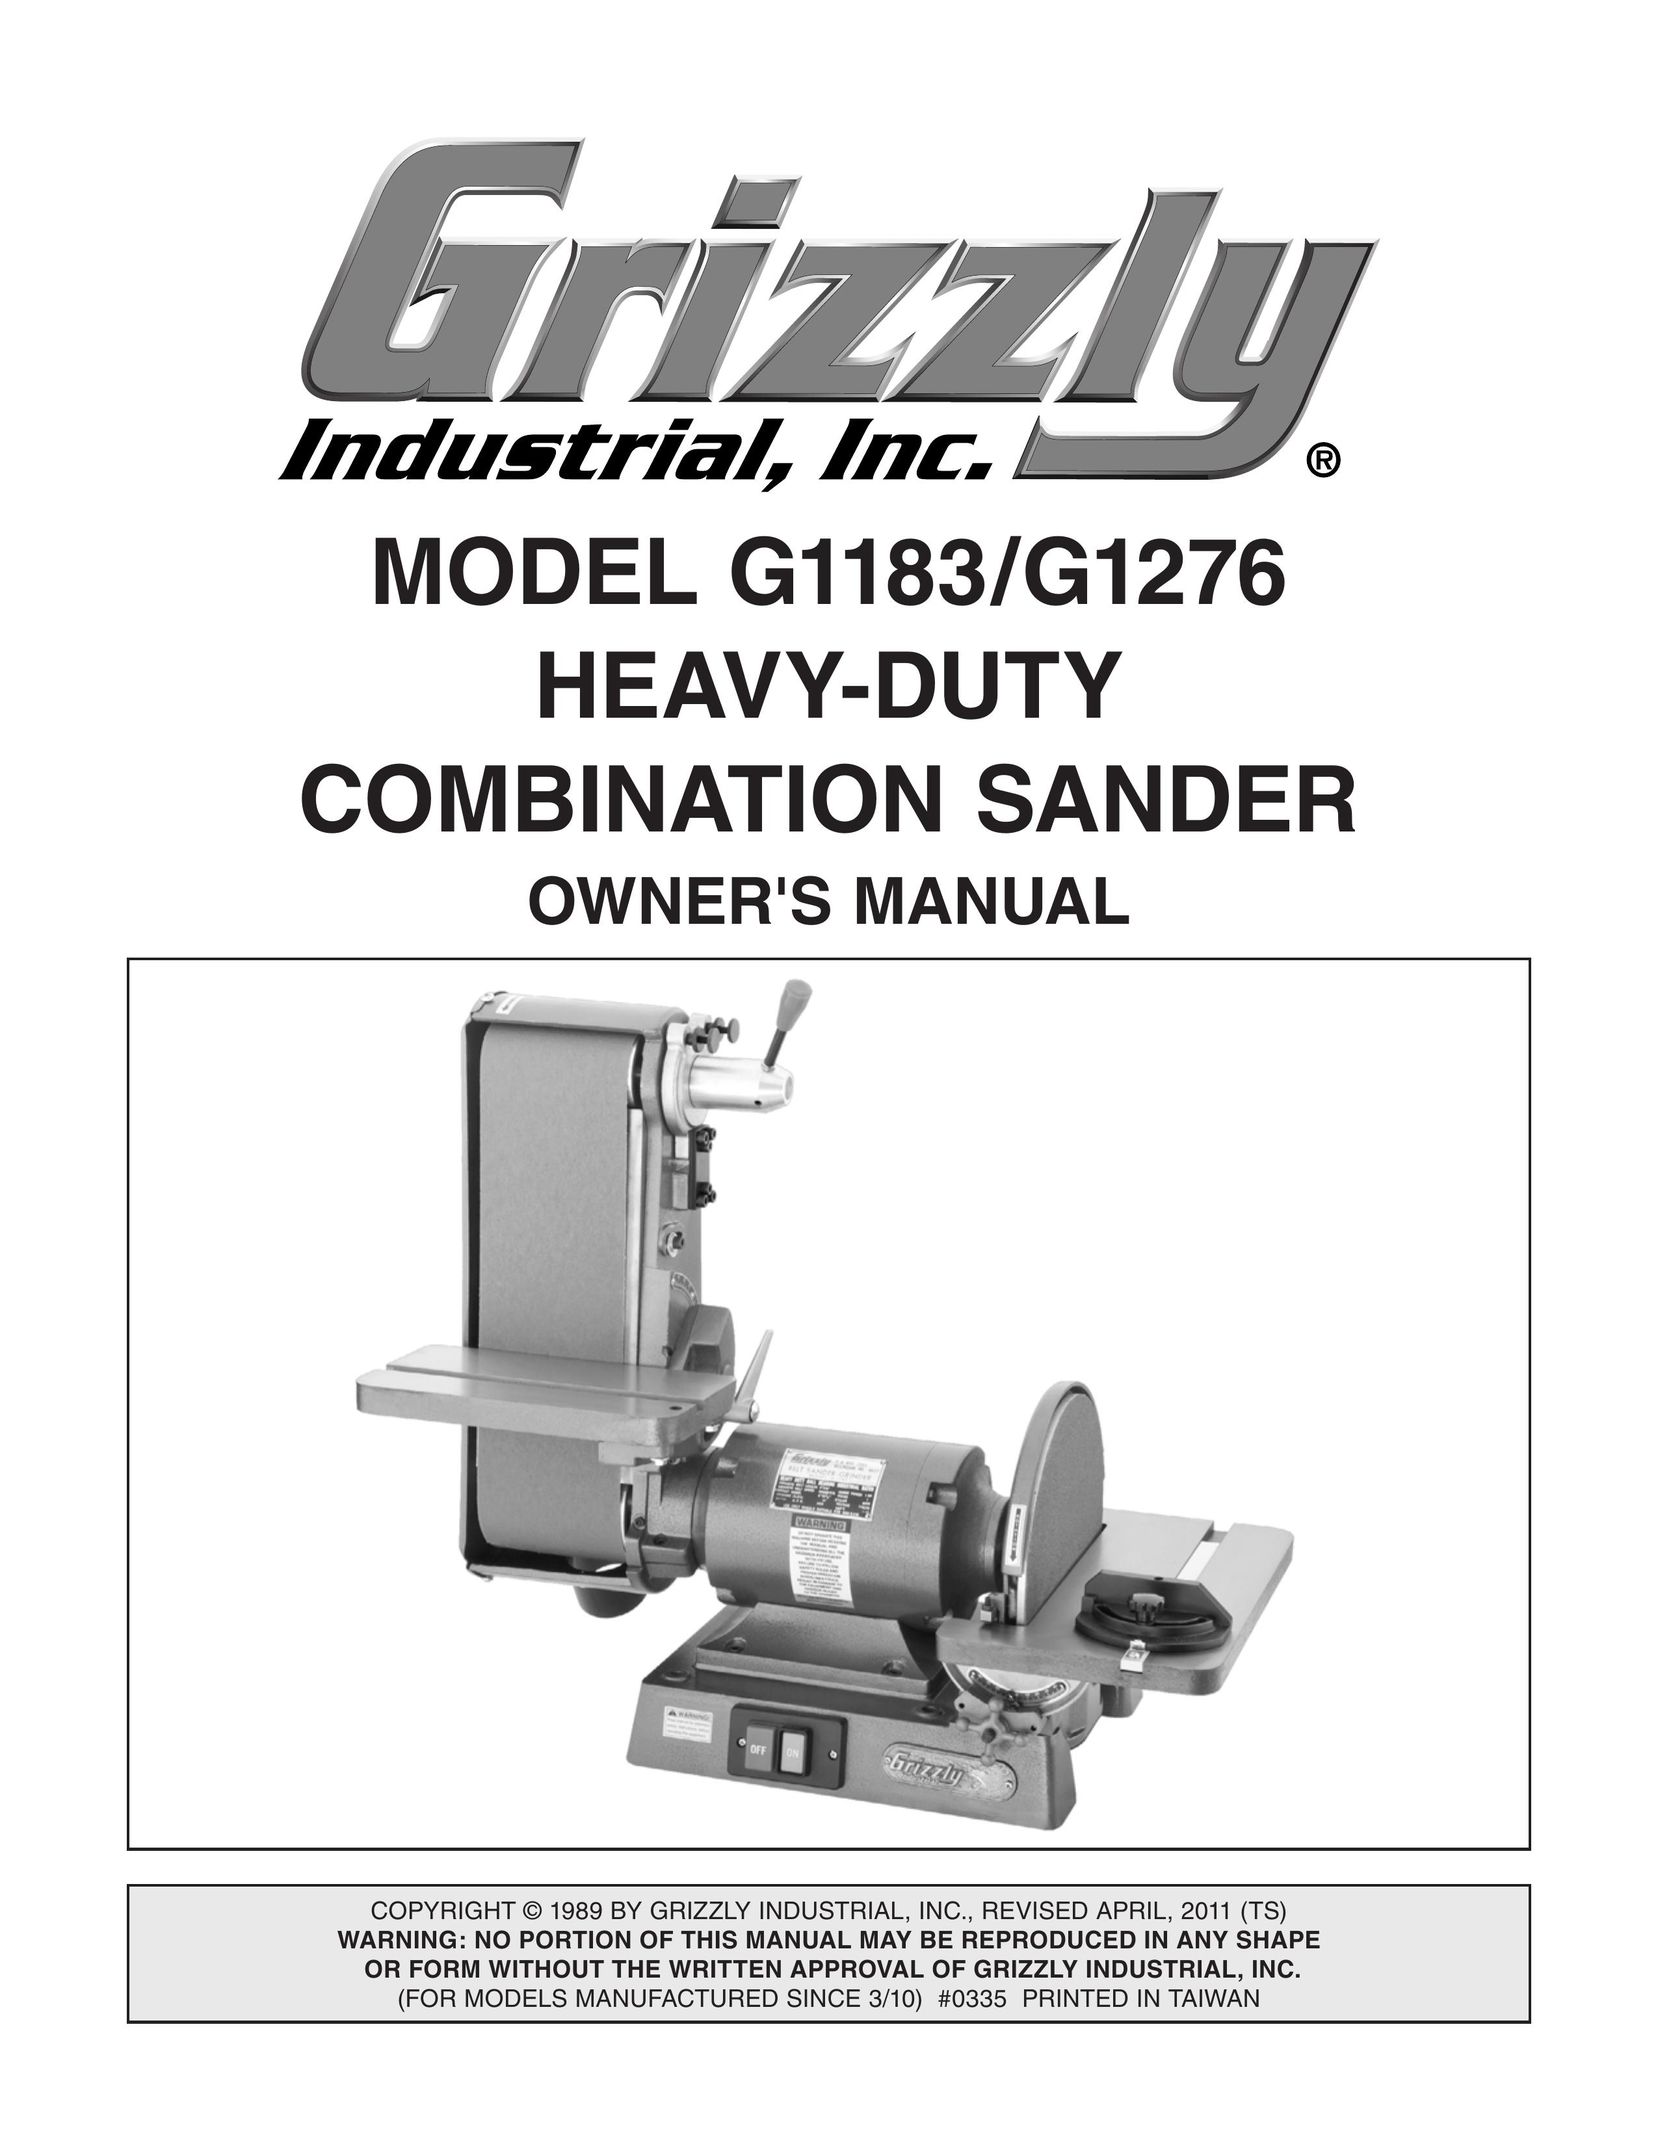 Grizzly G1183 Cordless Sander User Manual